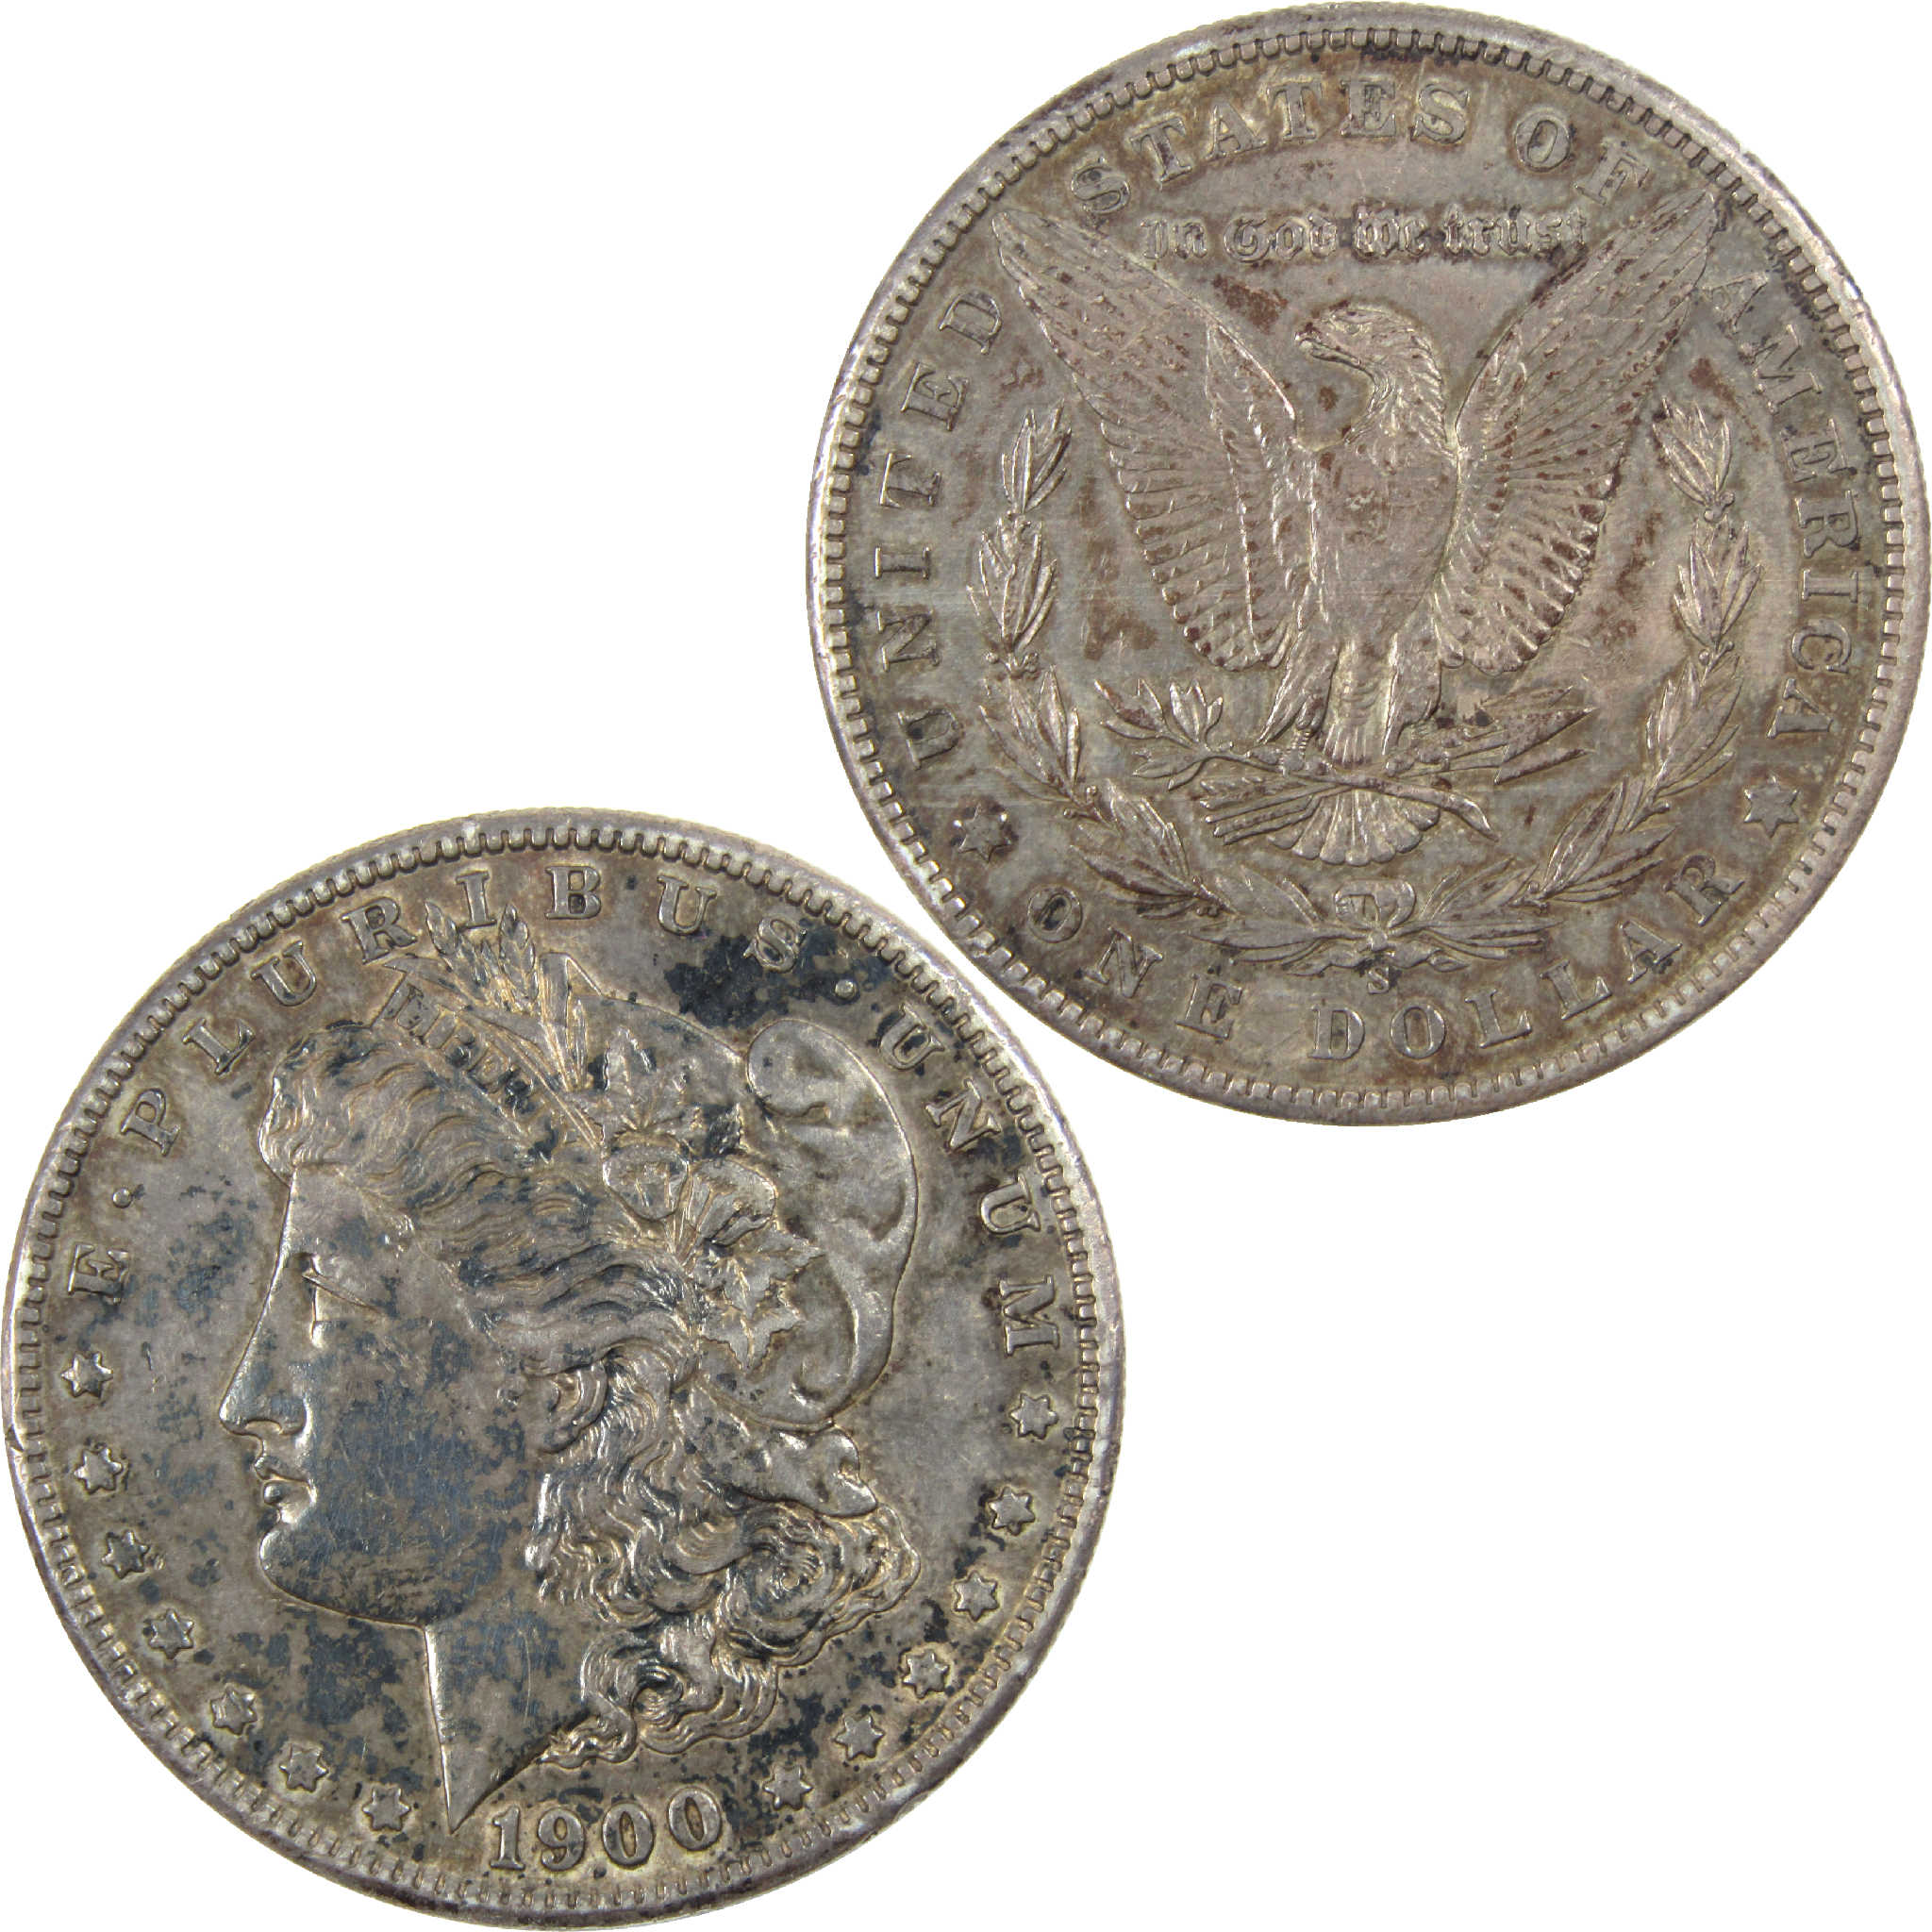 1900 S Morgan Dollar XF EF Extremely Fine Details Silver $1 SKU:I12239 - Morgan coin - Morgan silver dollar - Morgan silver dollar for sale - Profile Coins &amp; Collectibles